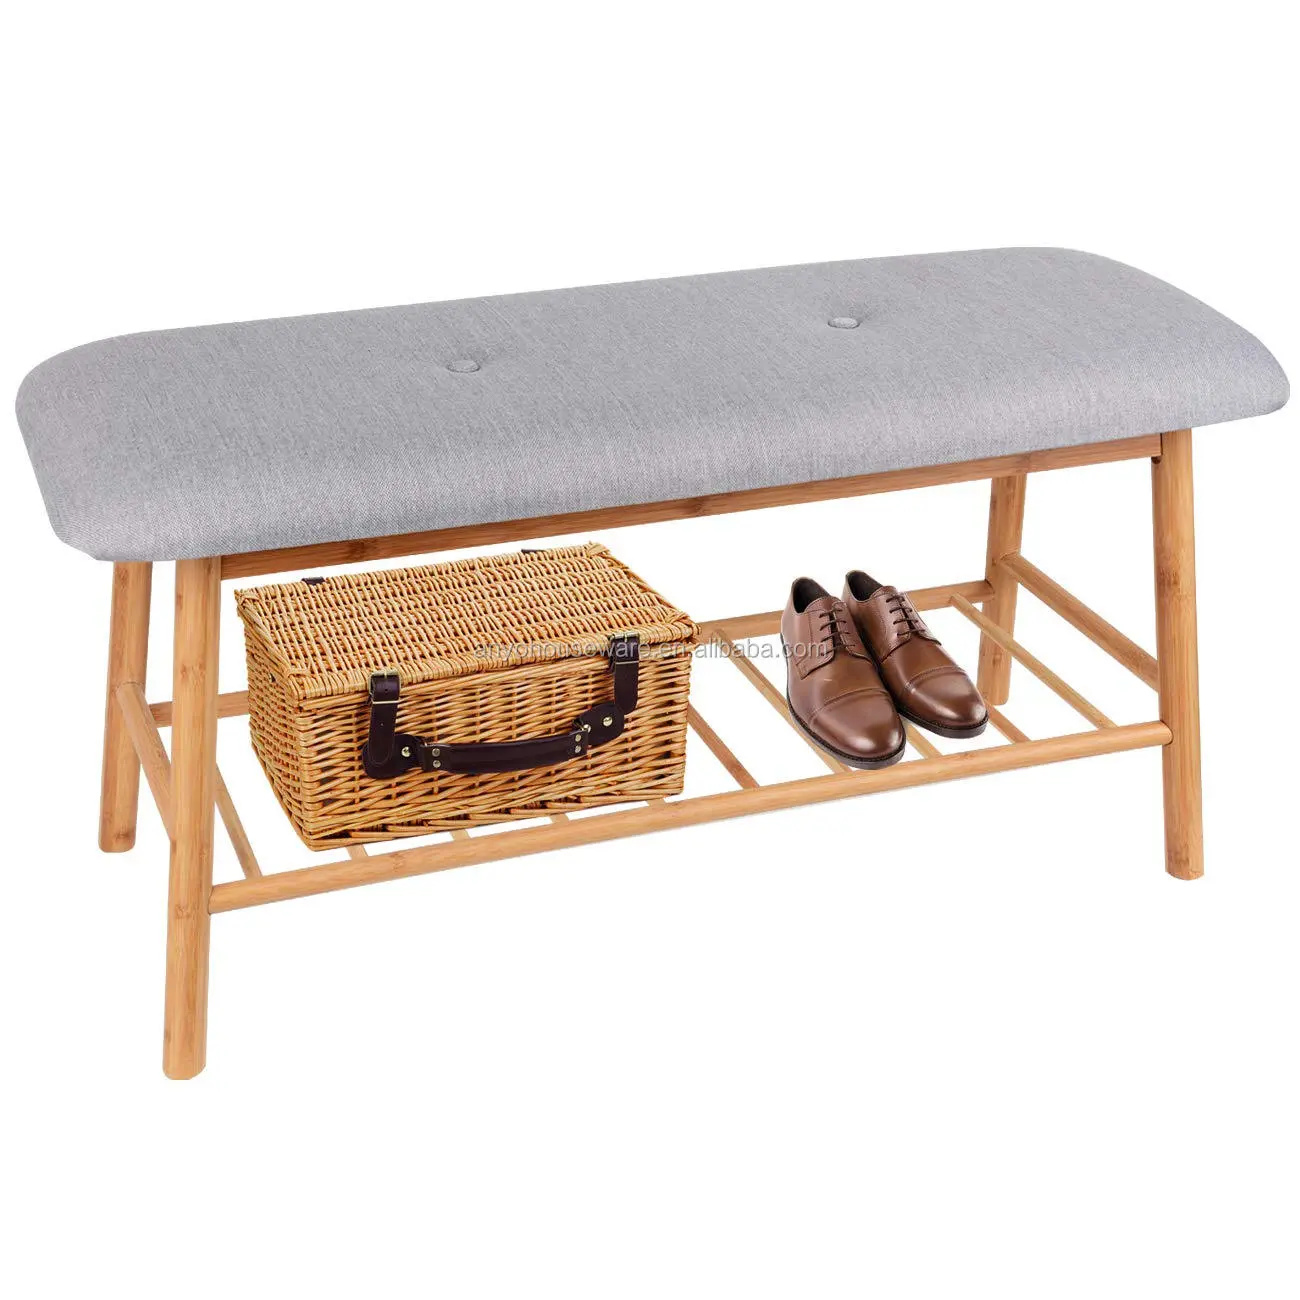 2020 Modern High quality natural style Bamboo Shoe Bench Seat with fabric cushion rack